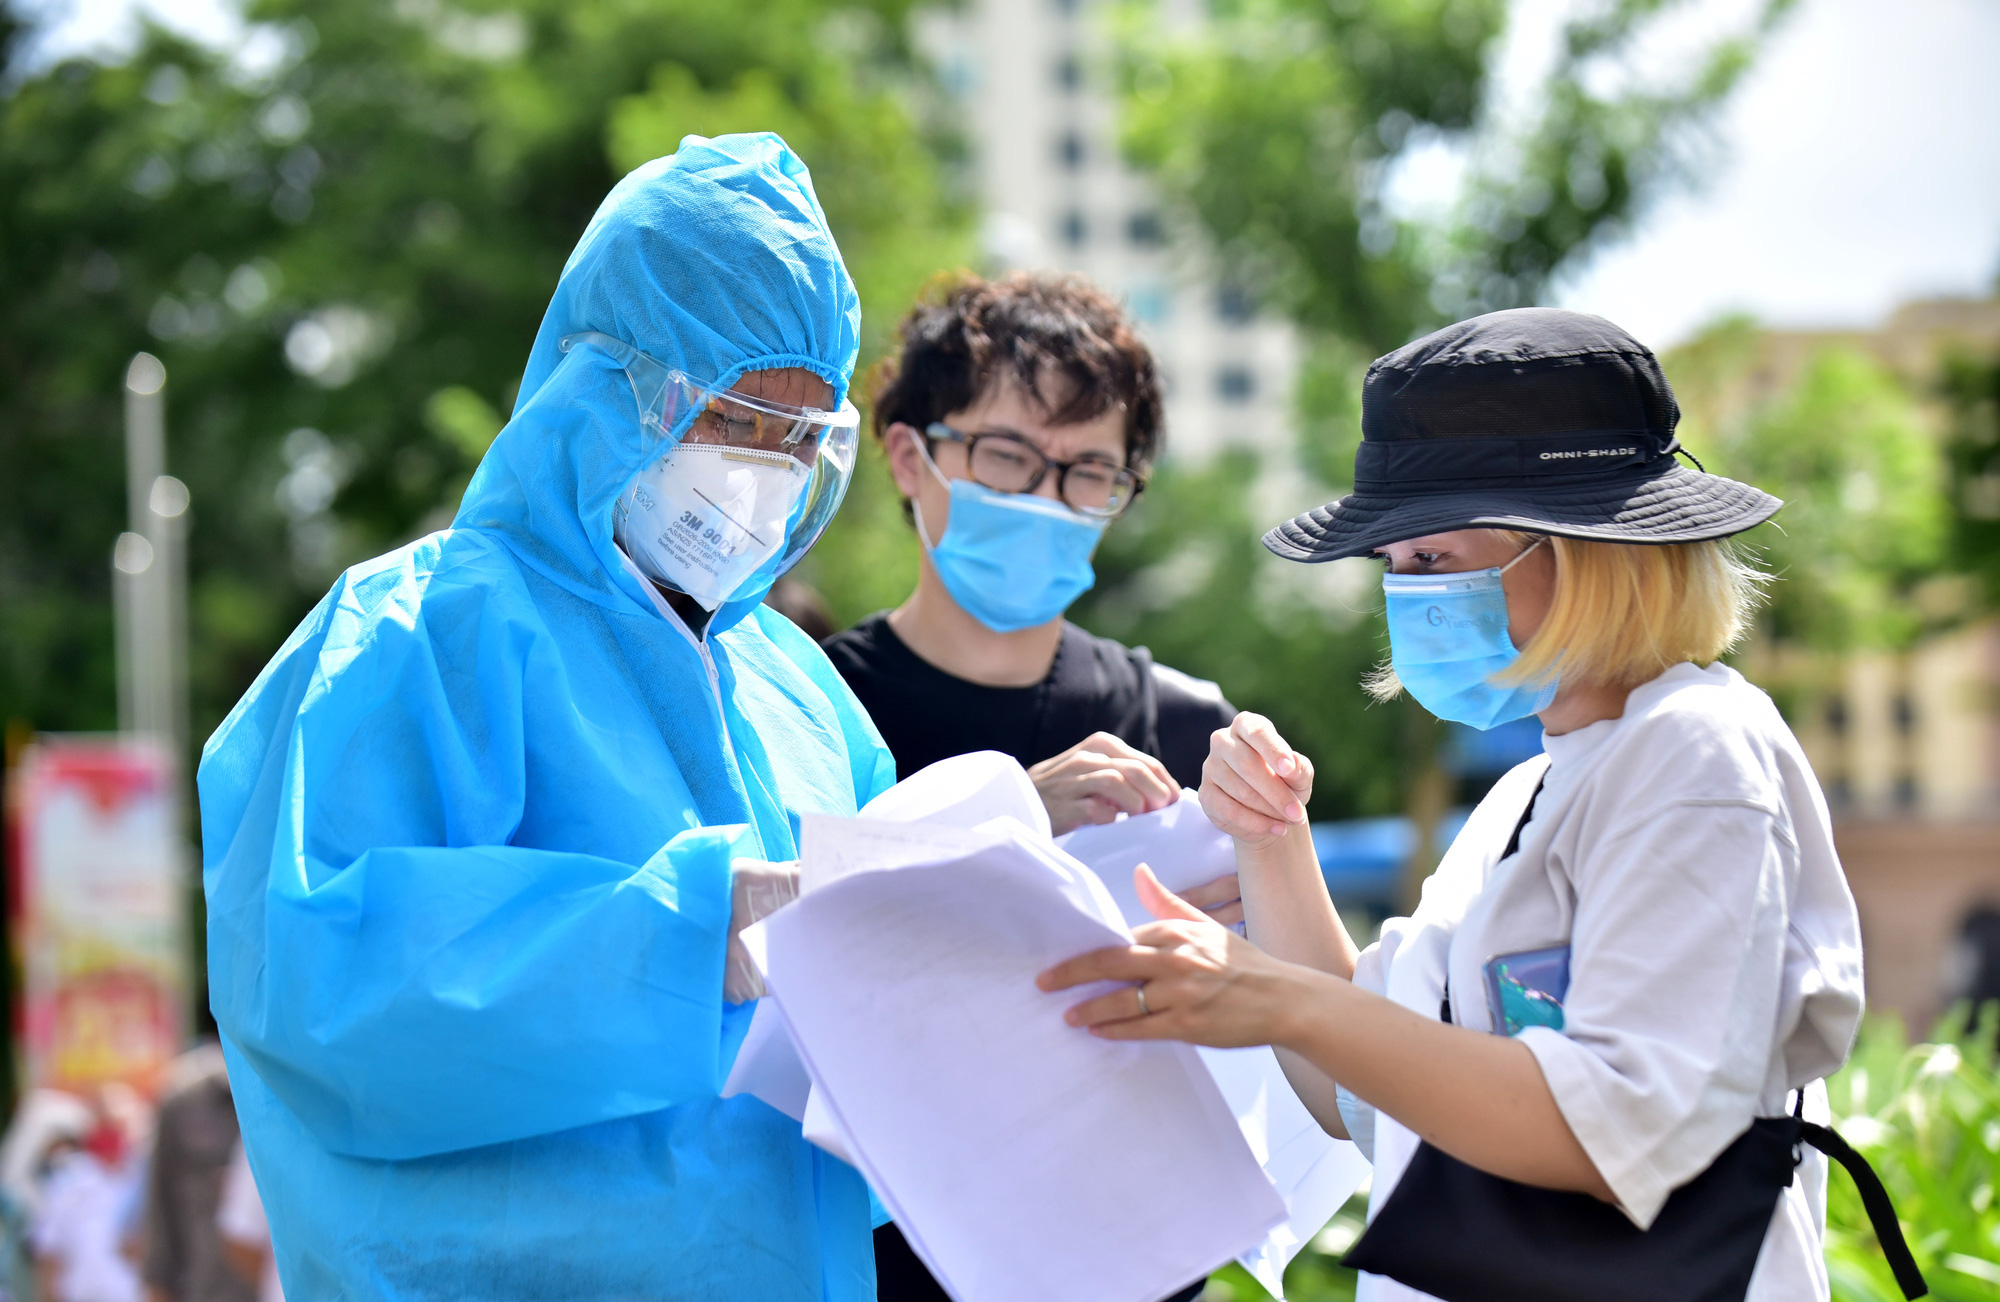 How can foreigners seek help during COVID-19 pandemic in Ho Chi Minh City?